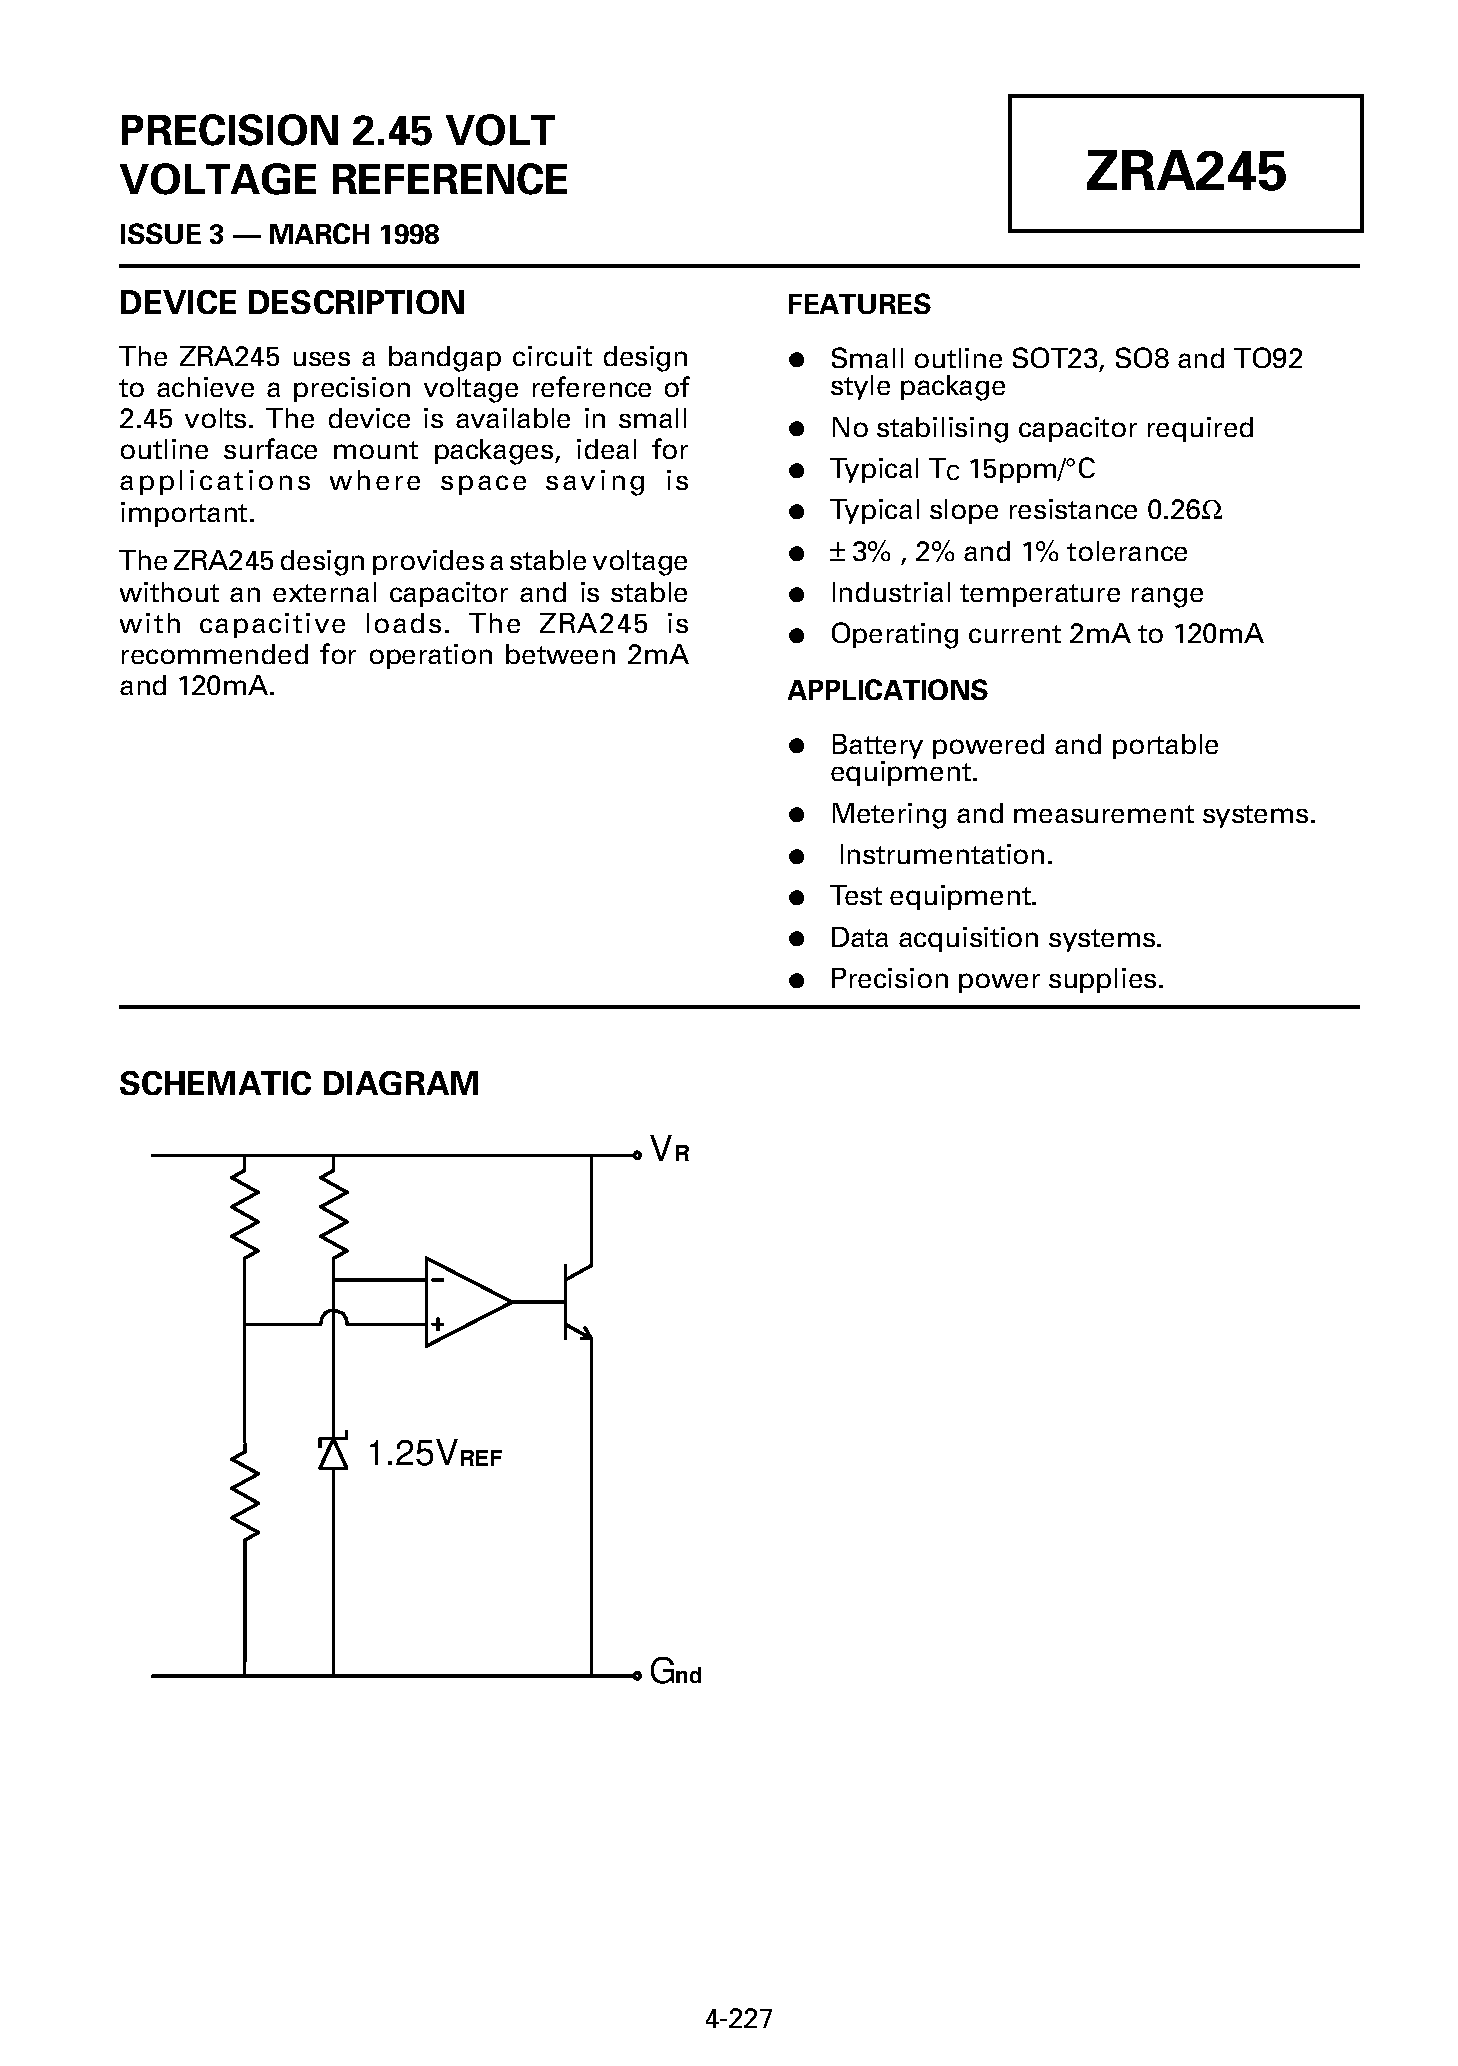 Datasheet ZRA245Y02 - PRECISION 2.45 VOLT VOLTAGE REFERENCE page 1